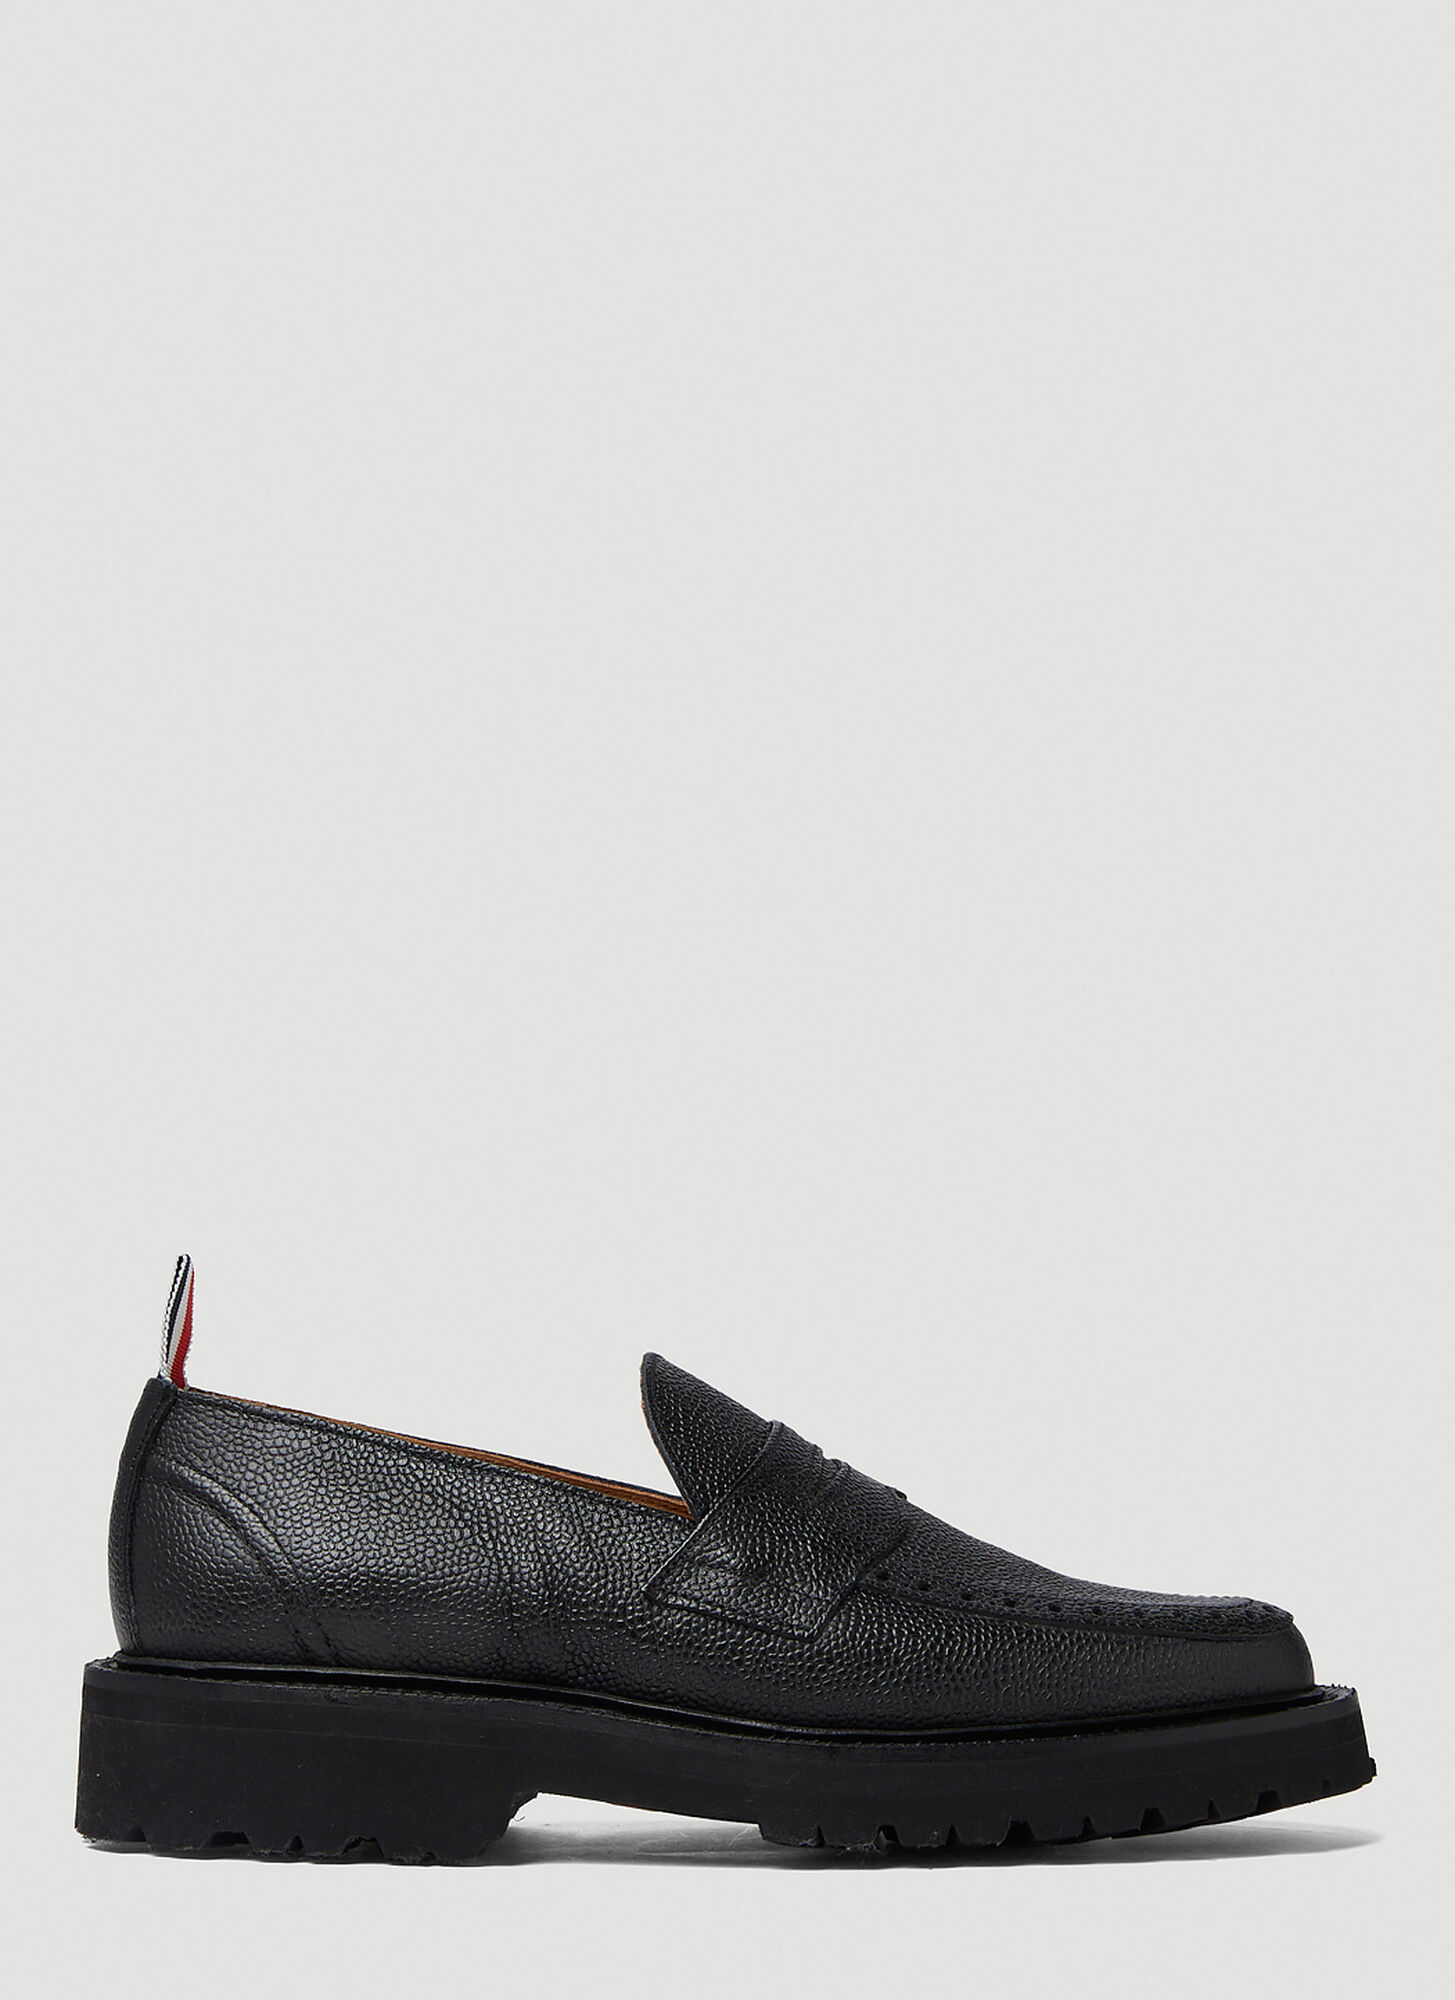 THOM BROWNE COMMANDO SOLE PENNY LOAFERS